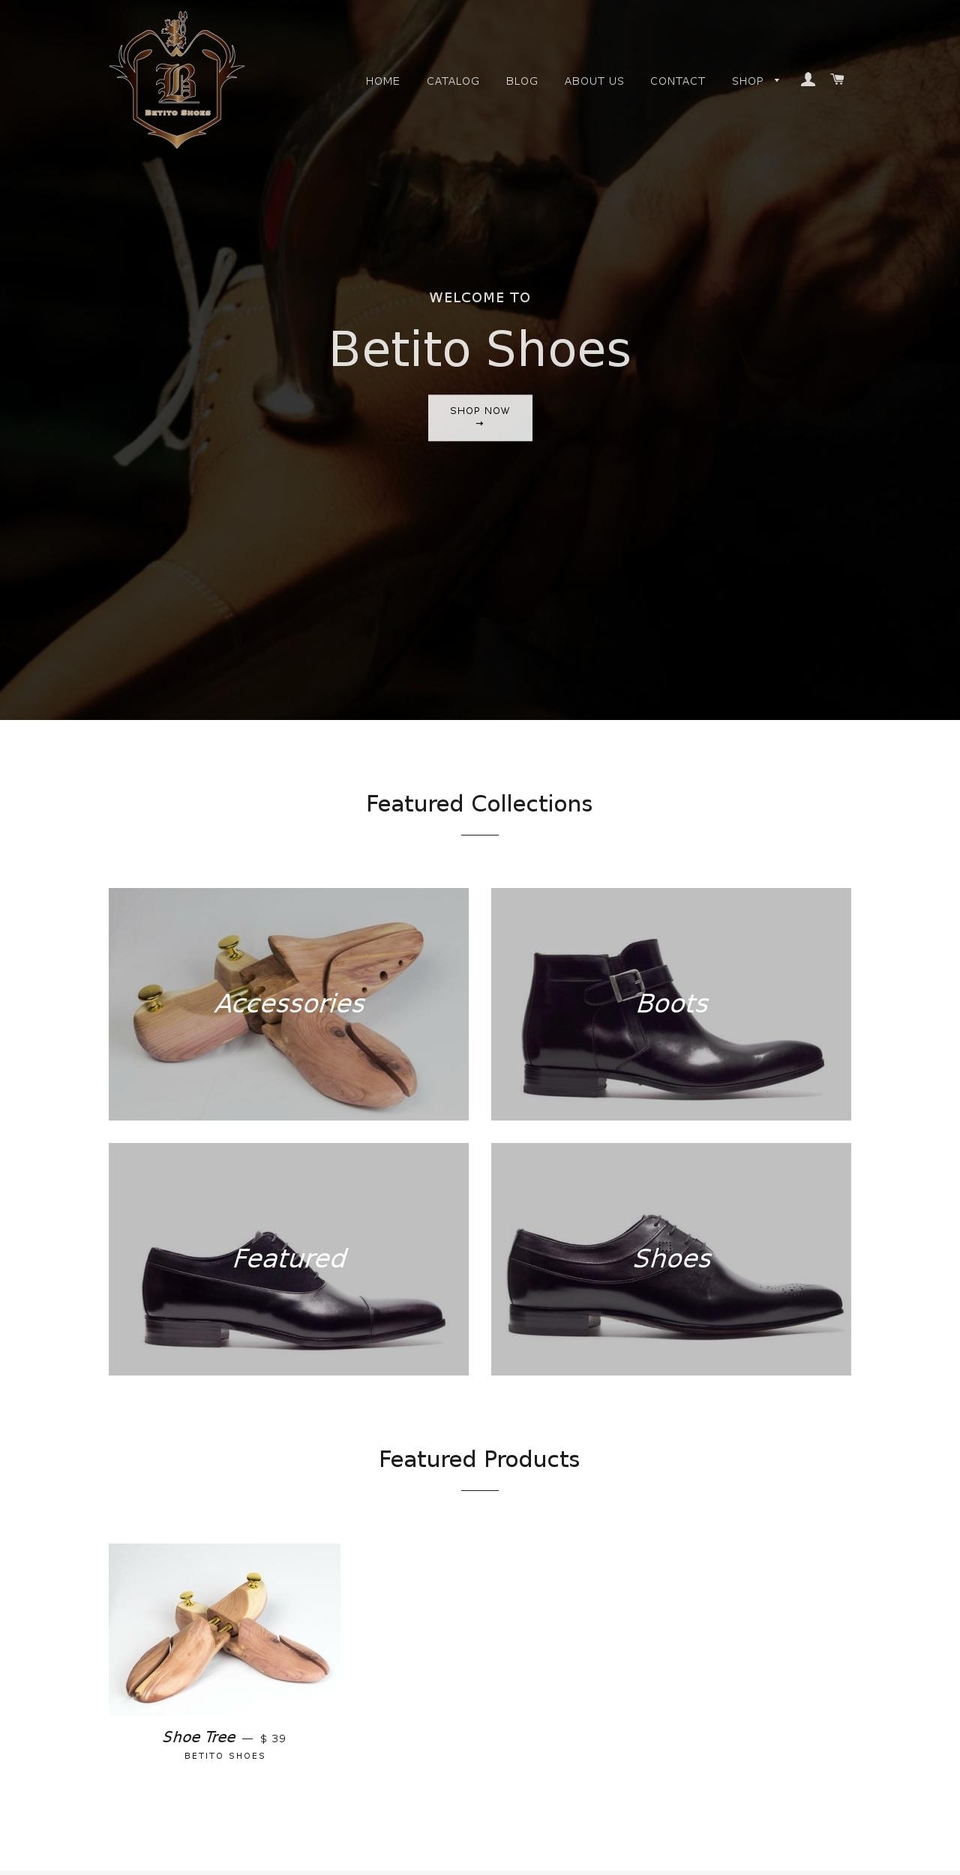 YourStore Shopify theme site example betitoshoes.com